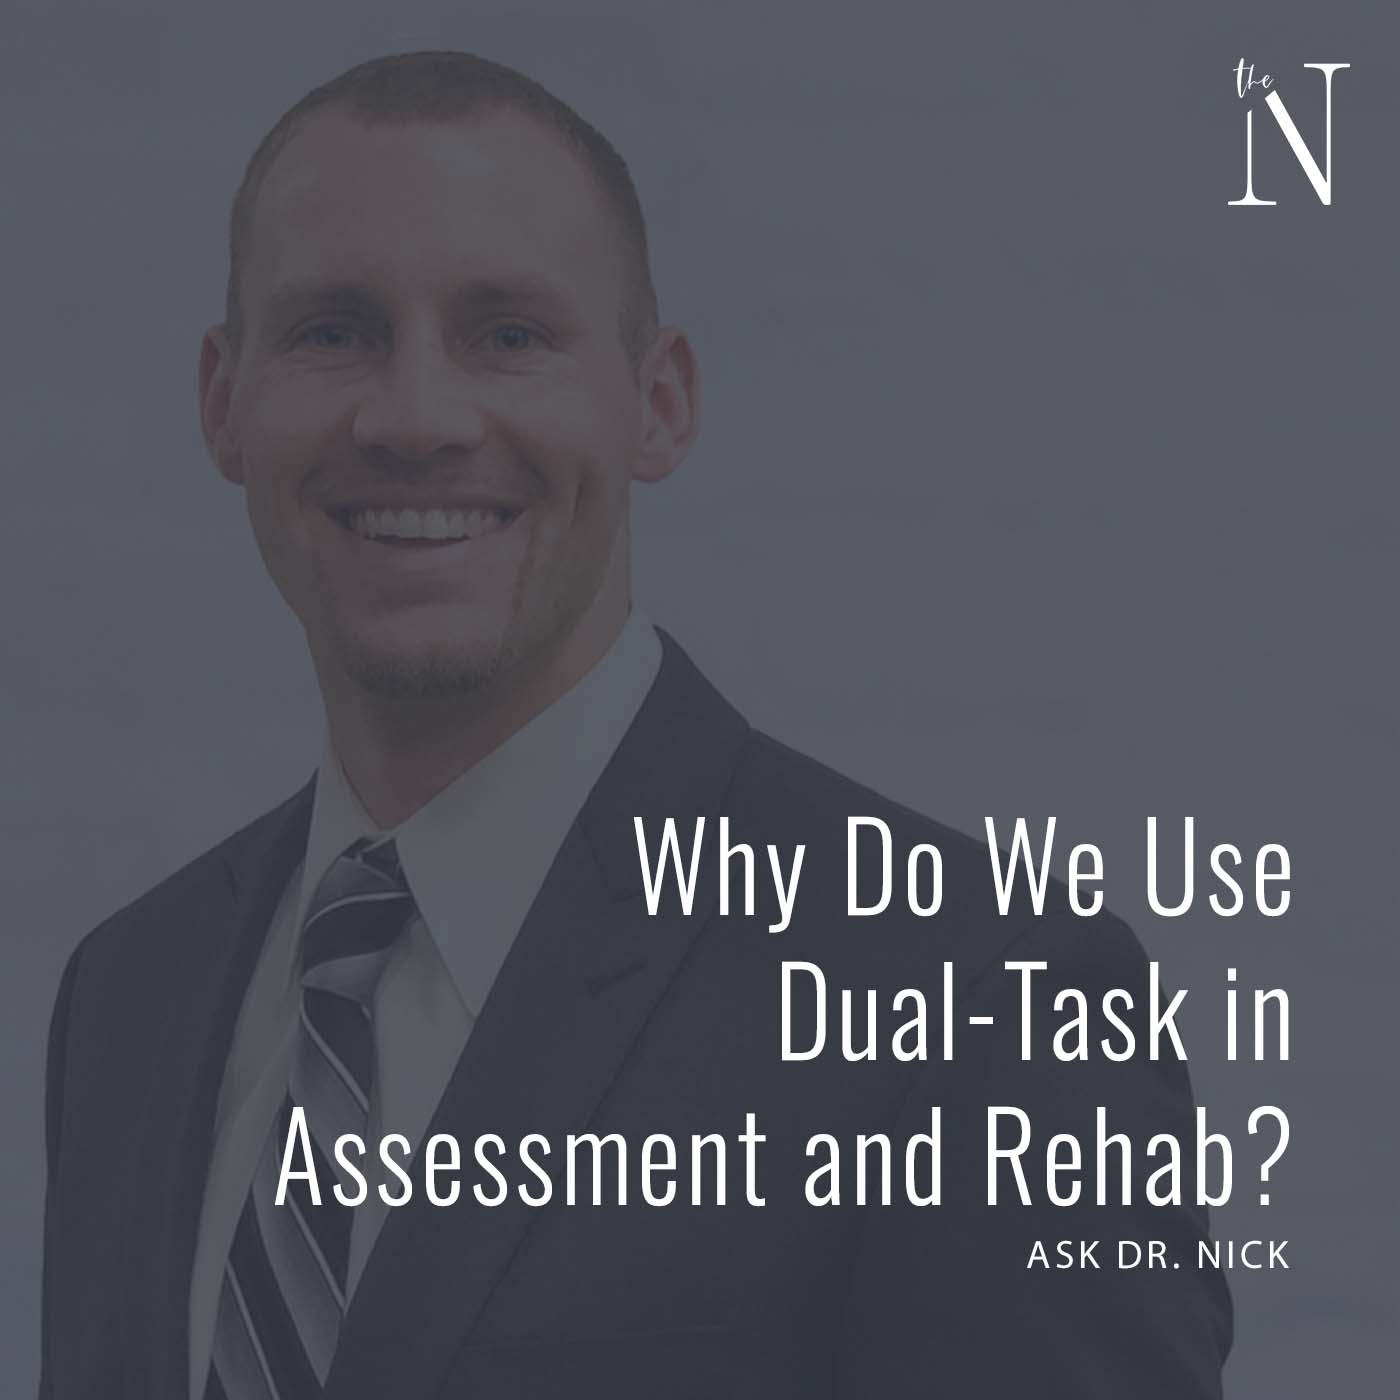 Dual-Task in Assessment and Rehab